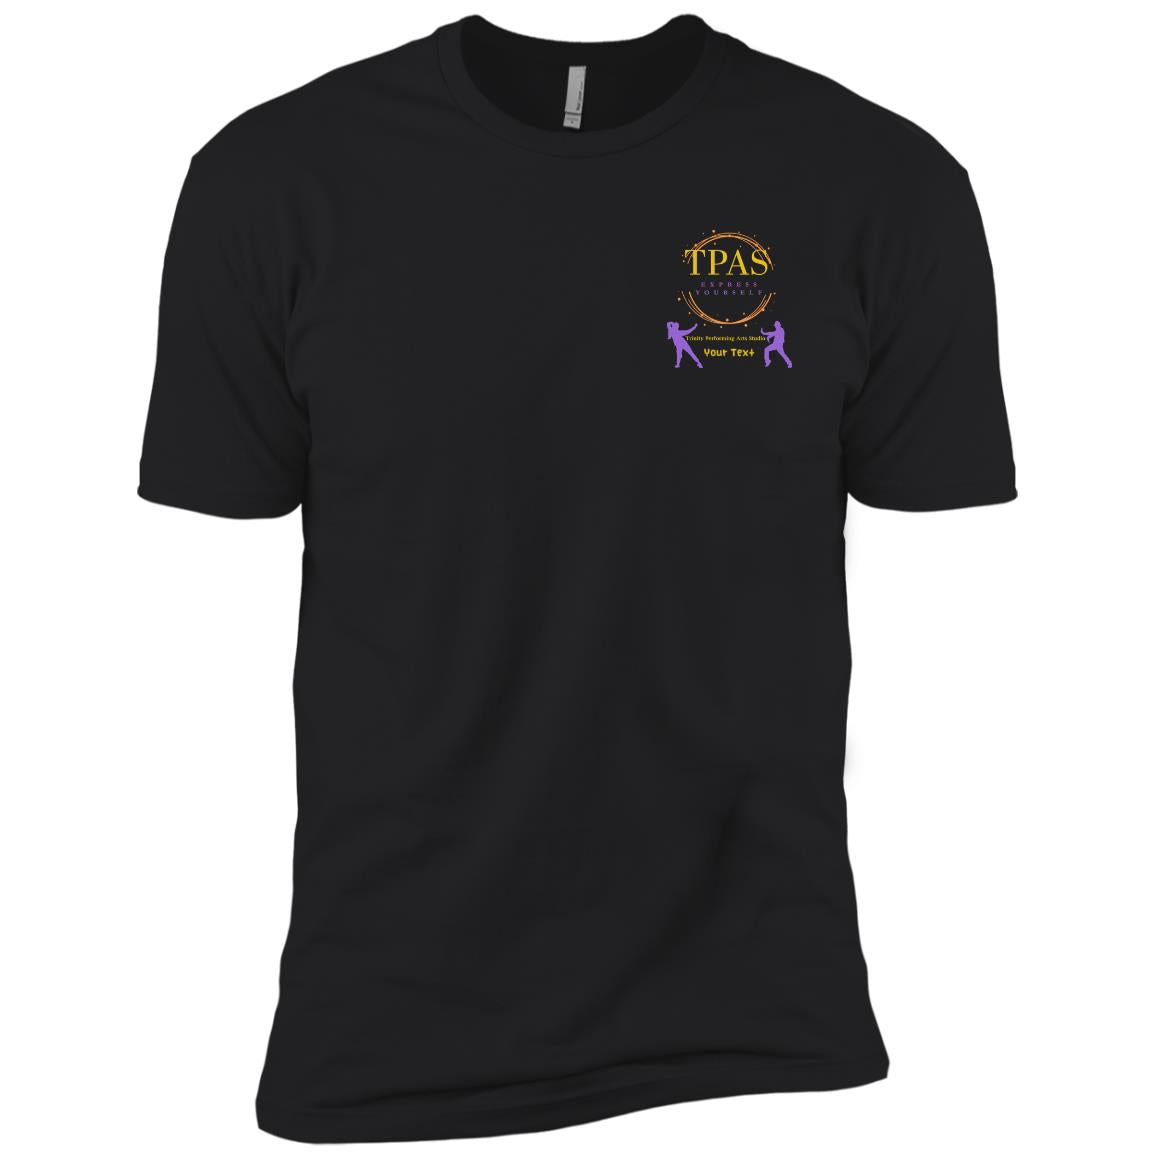 TPAS Competition Team Youth Premium T-Shirt